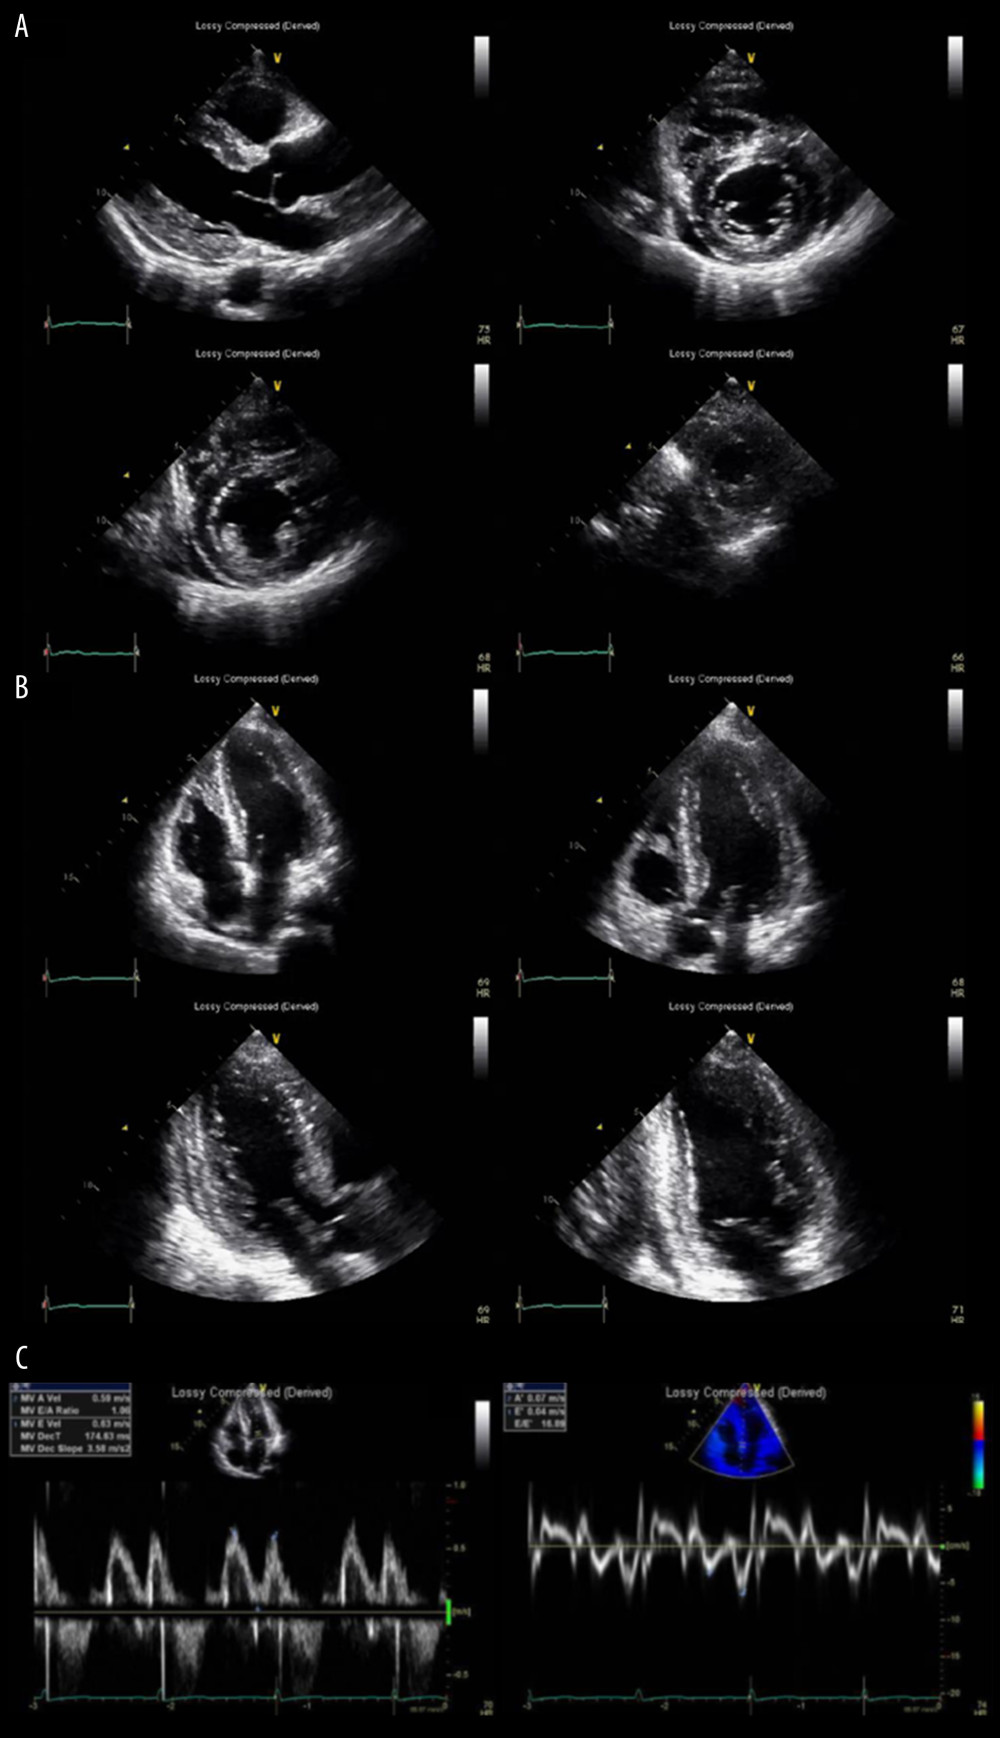 Post-pericardiocentesis echocardiographic findings. (A) Pericardial effusion was not observed on the parasternal long-axis view or parasternal short-axis views. Definite concentric left ventricular hypertrophy was detected on the parasternal long-axis view. (B) Pericardial effusion was not observed on various apical views. (C) The mitral valve inflow velocity in terms of E and A velocity and mitral annulus tissue Doppler velocity as e’ and a’ velocities were clearly detected after pericardiocentesis.